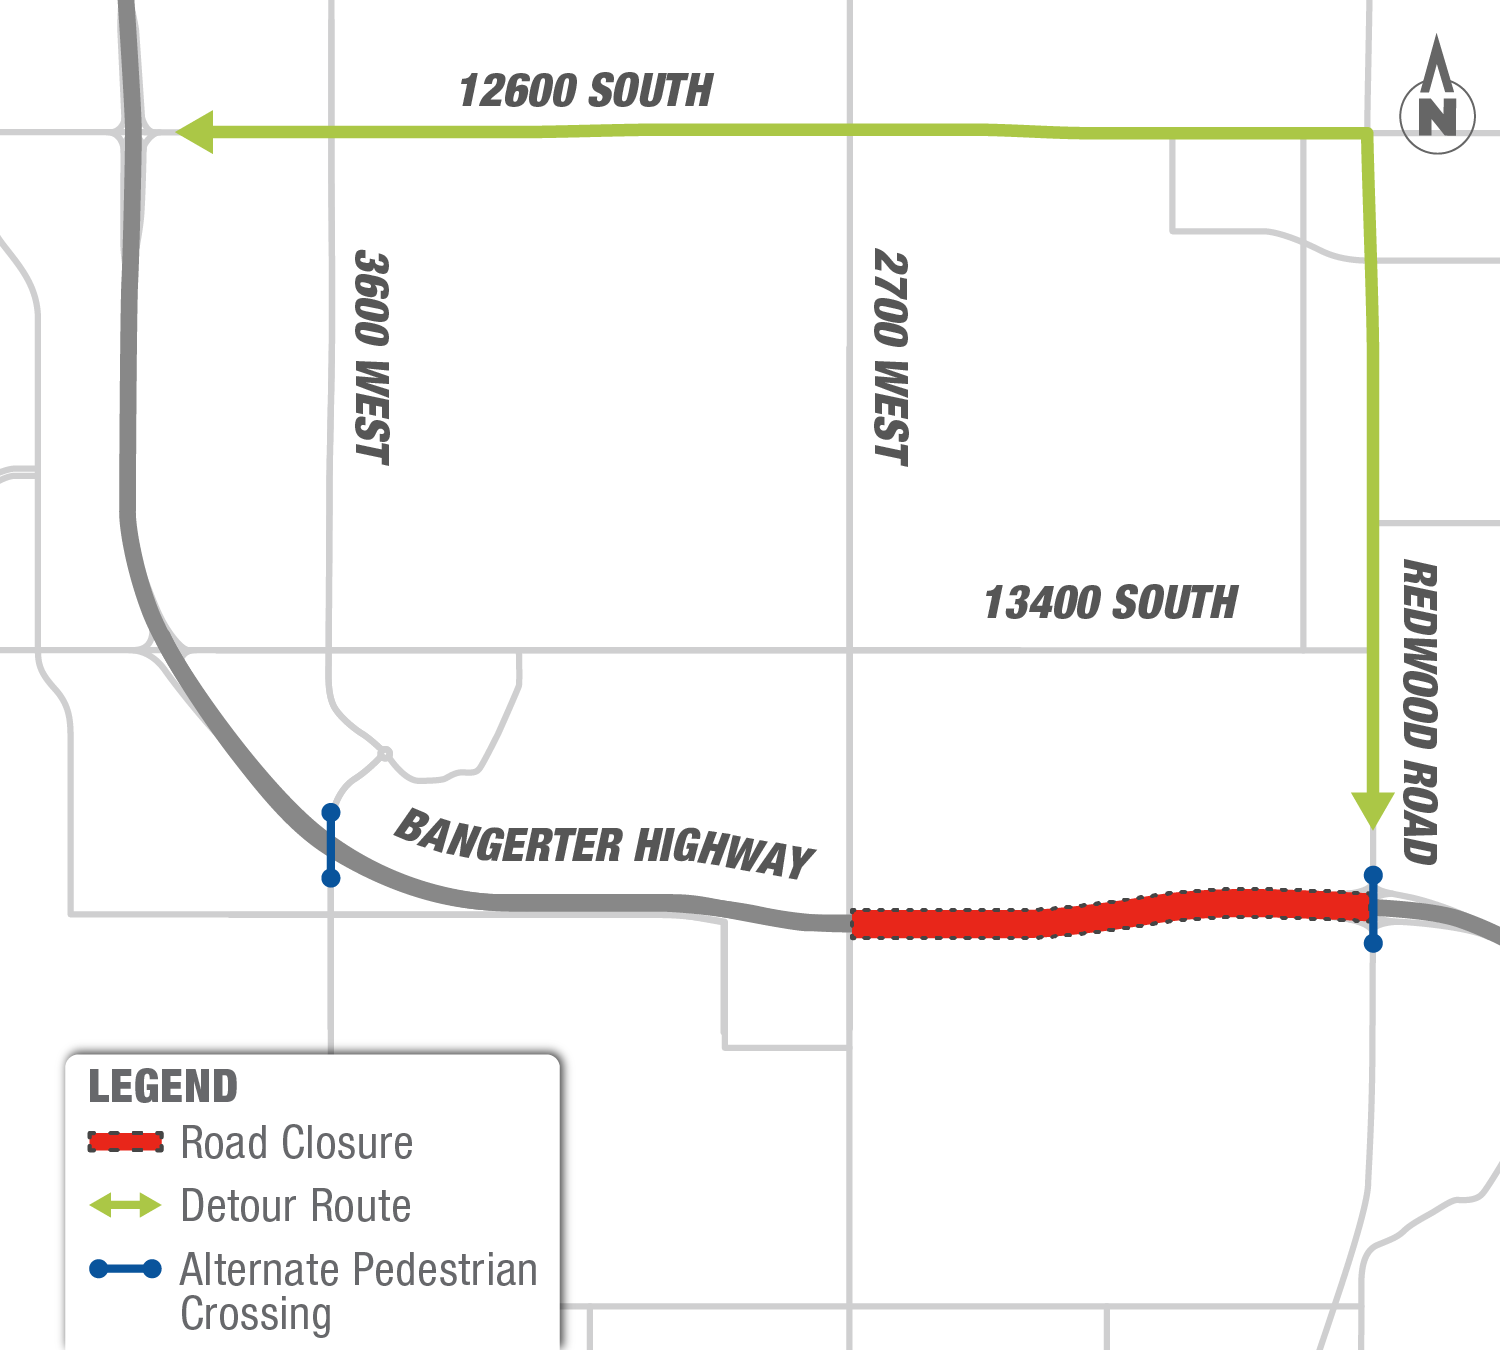 A detour map showing alternate routes around the closure on Bangerter Highway between 2700 West and Redwood Road. 